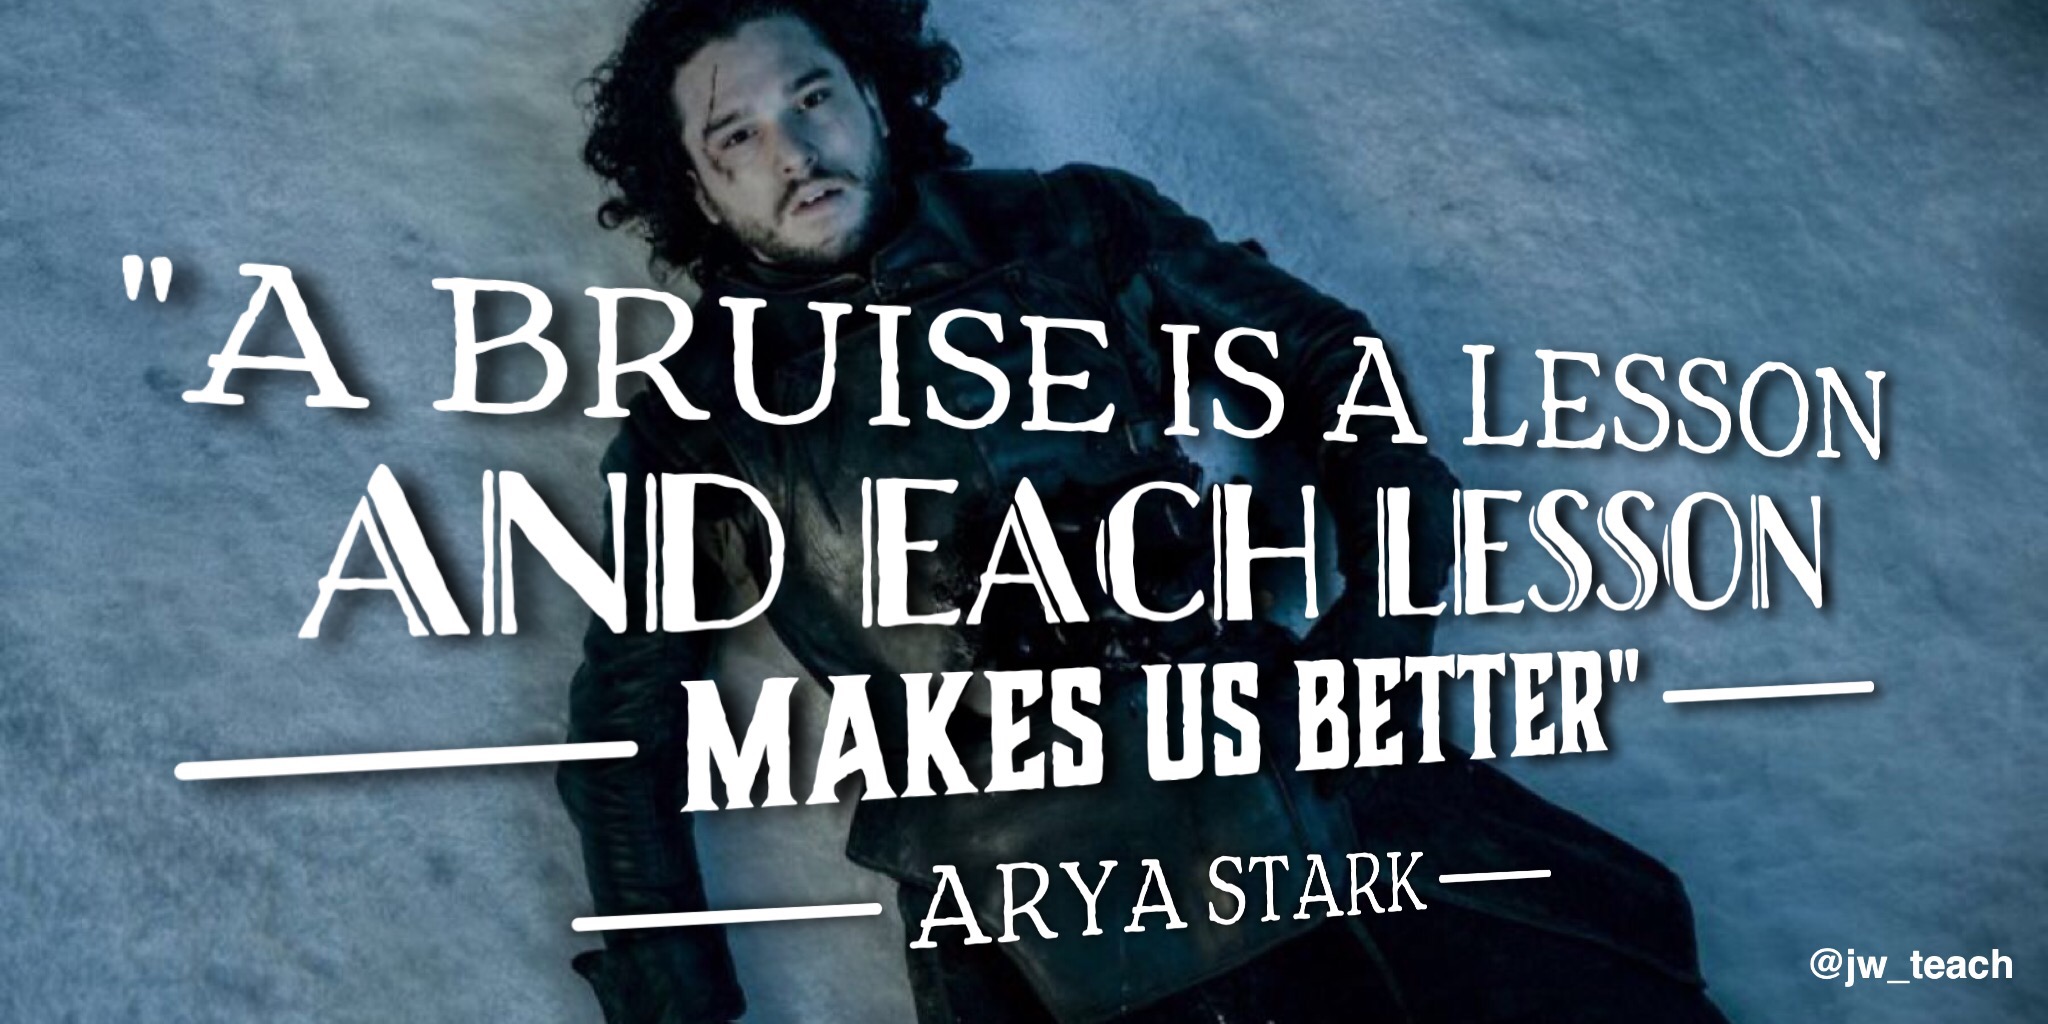 A bruise is a lesson and each lesson makes us better Game of thrones quotes for teachers